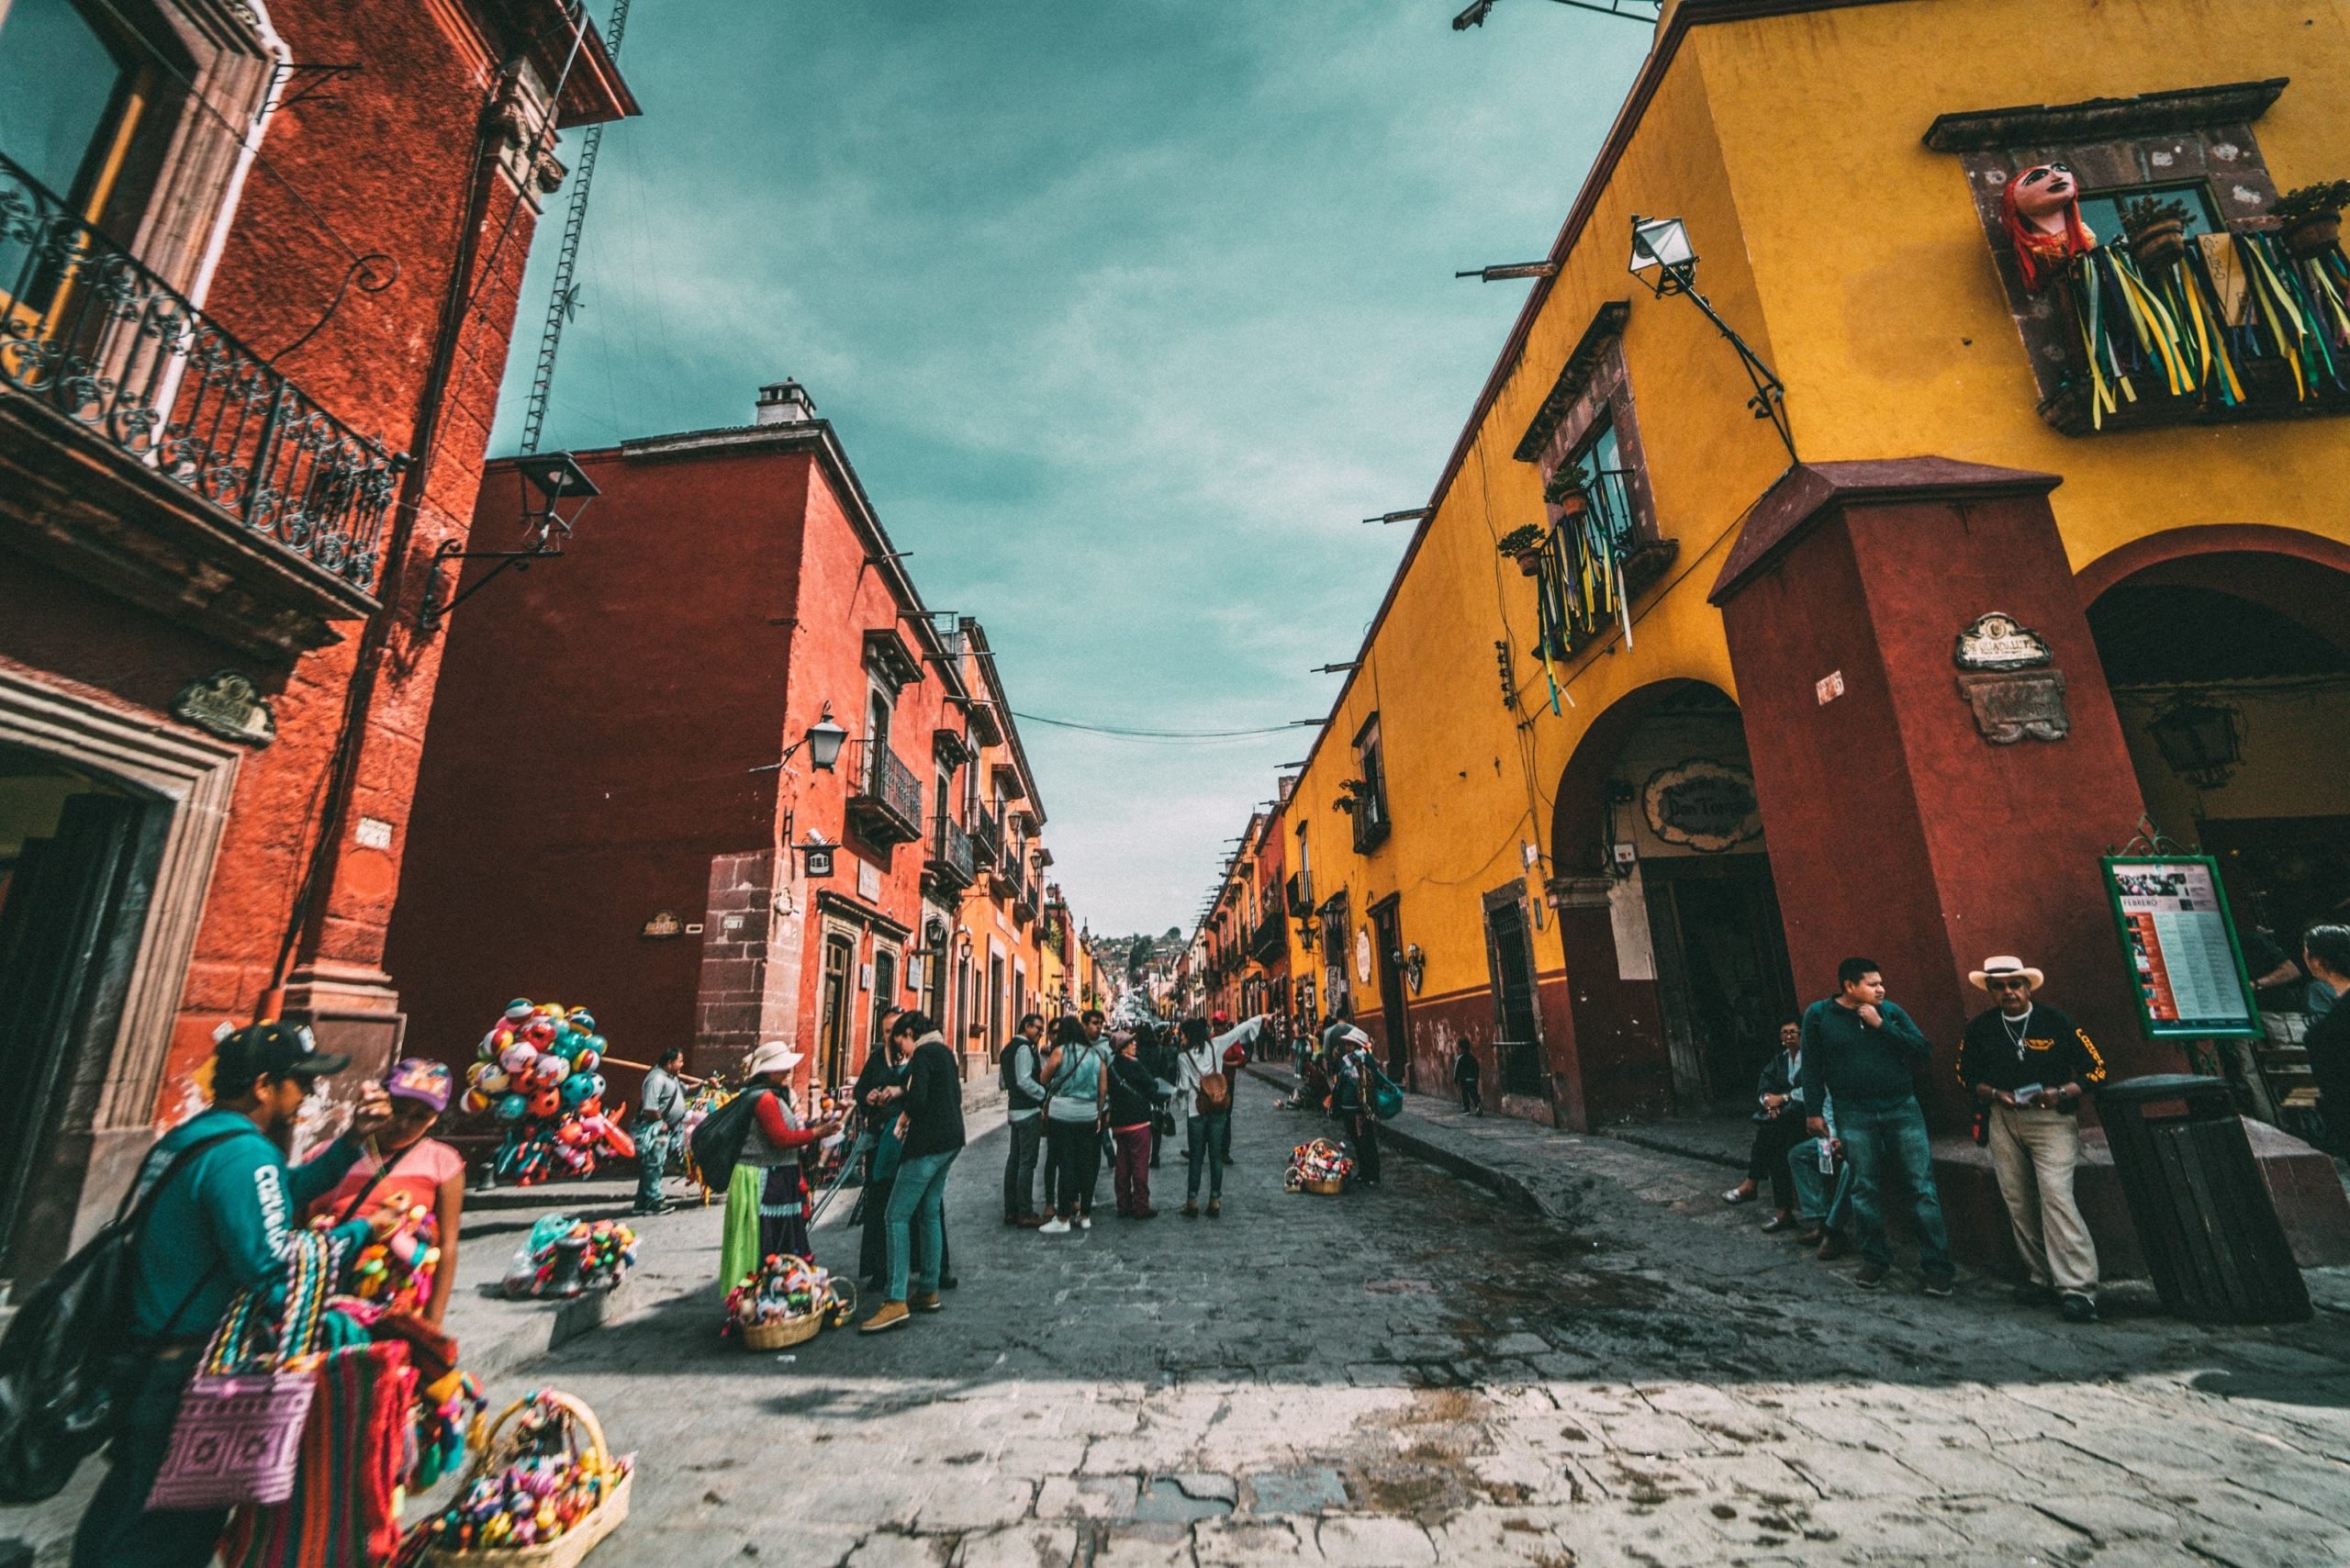 There’s always another street to explore in Mexico. 